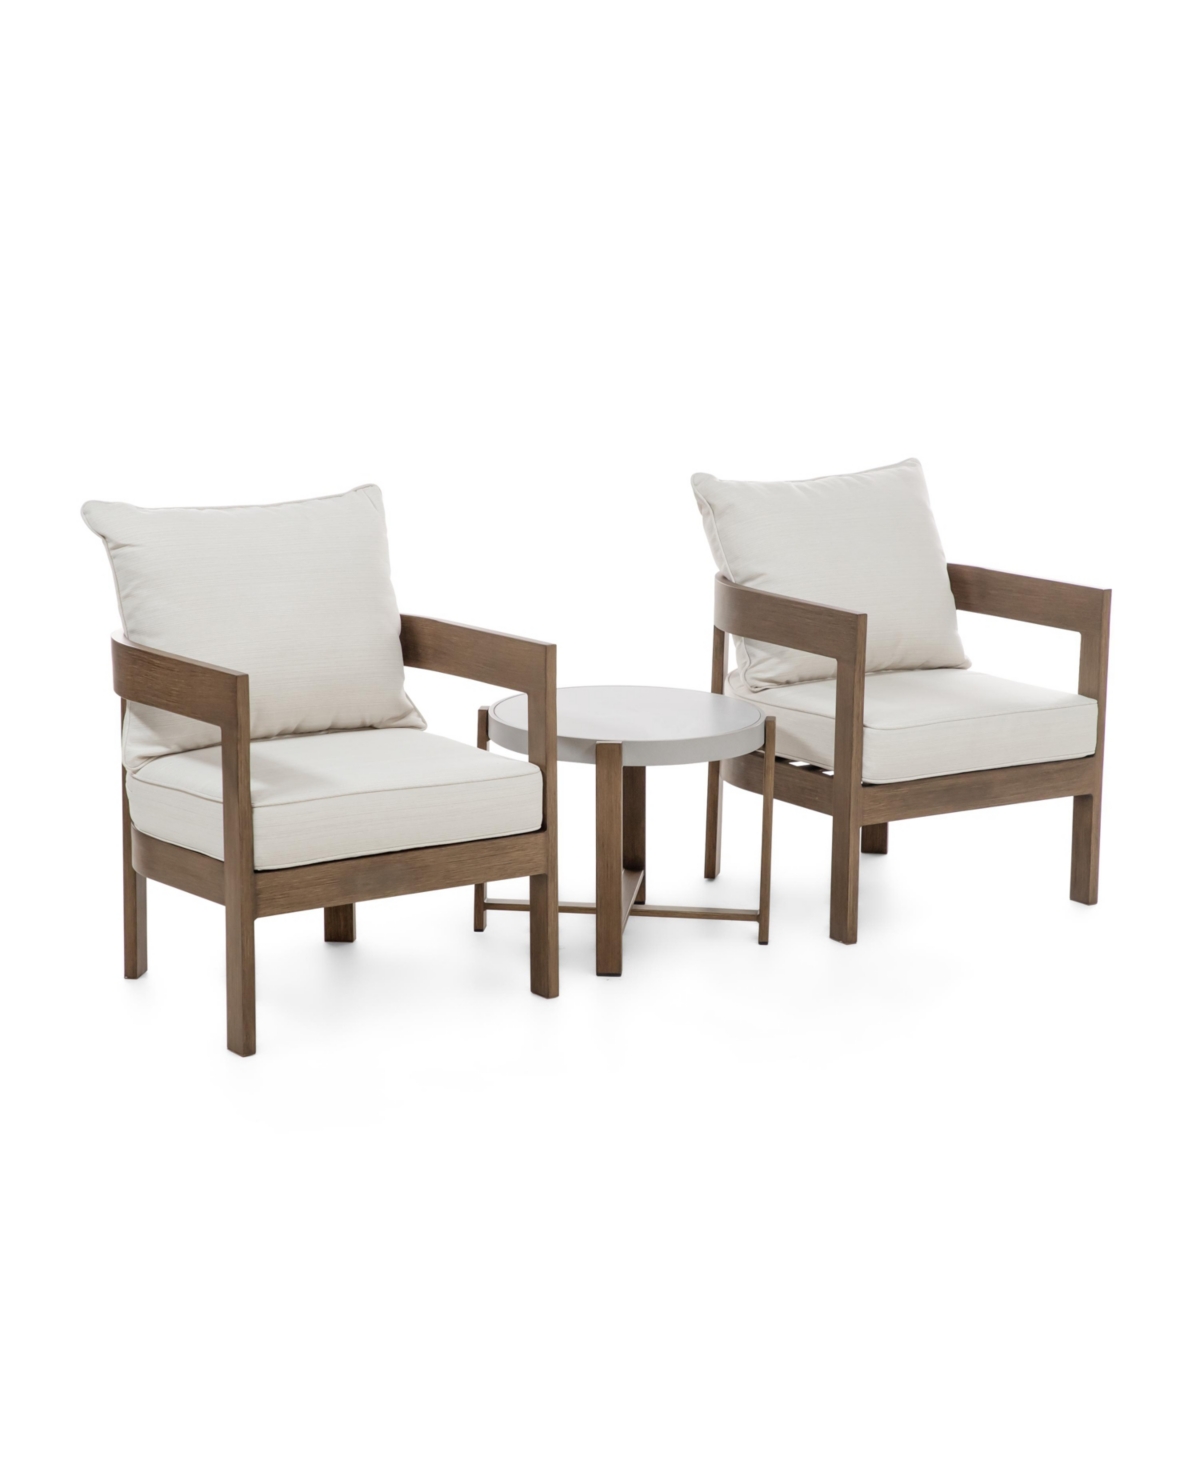 Furniture Of America 3 Piece Aluminum Stackable Patio Conversation Set In Natural